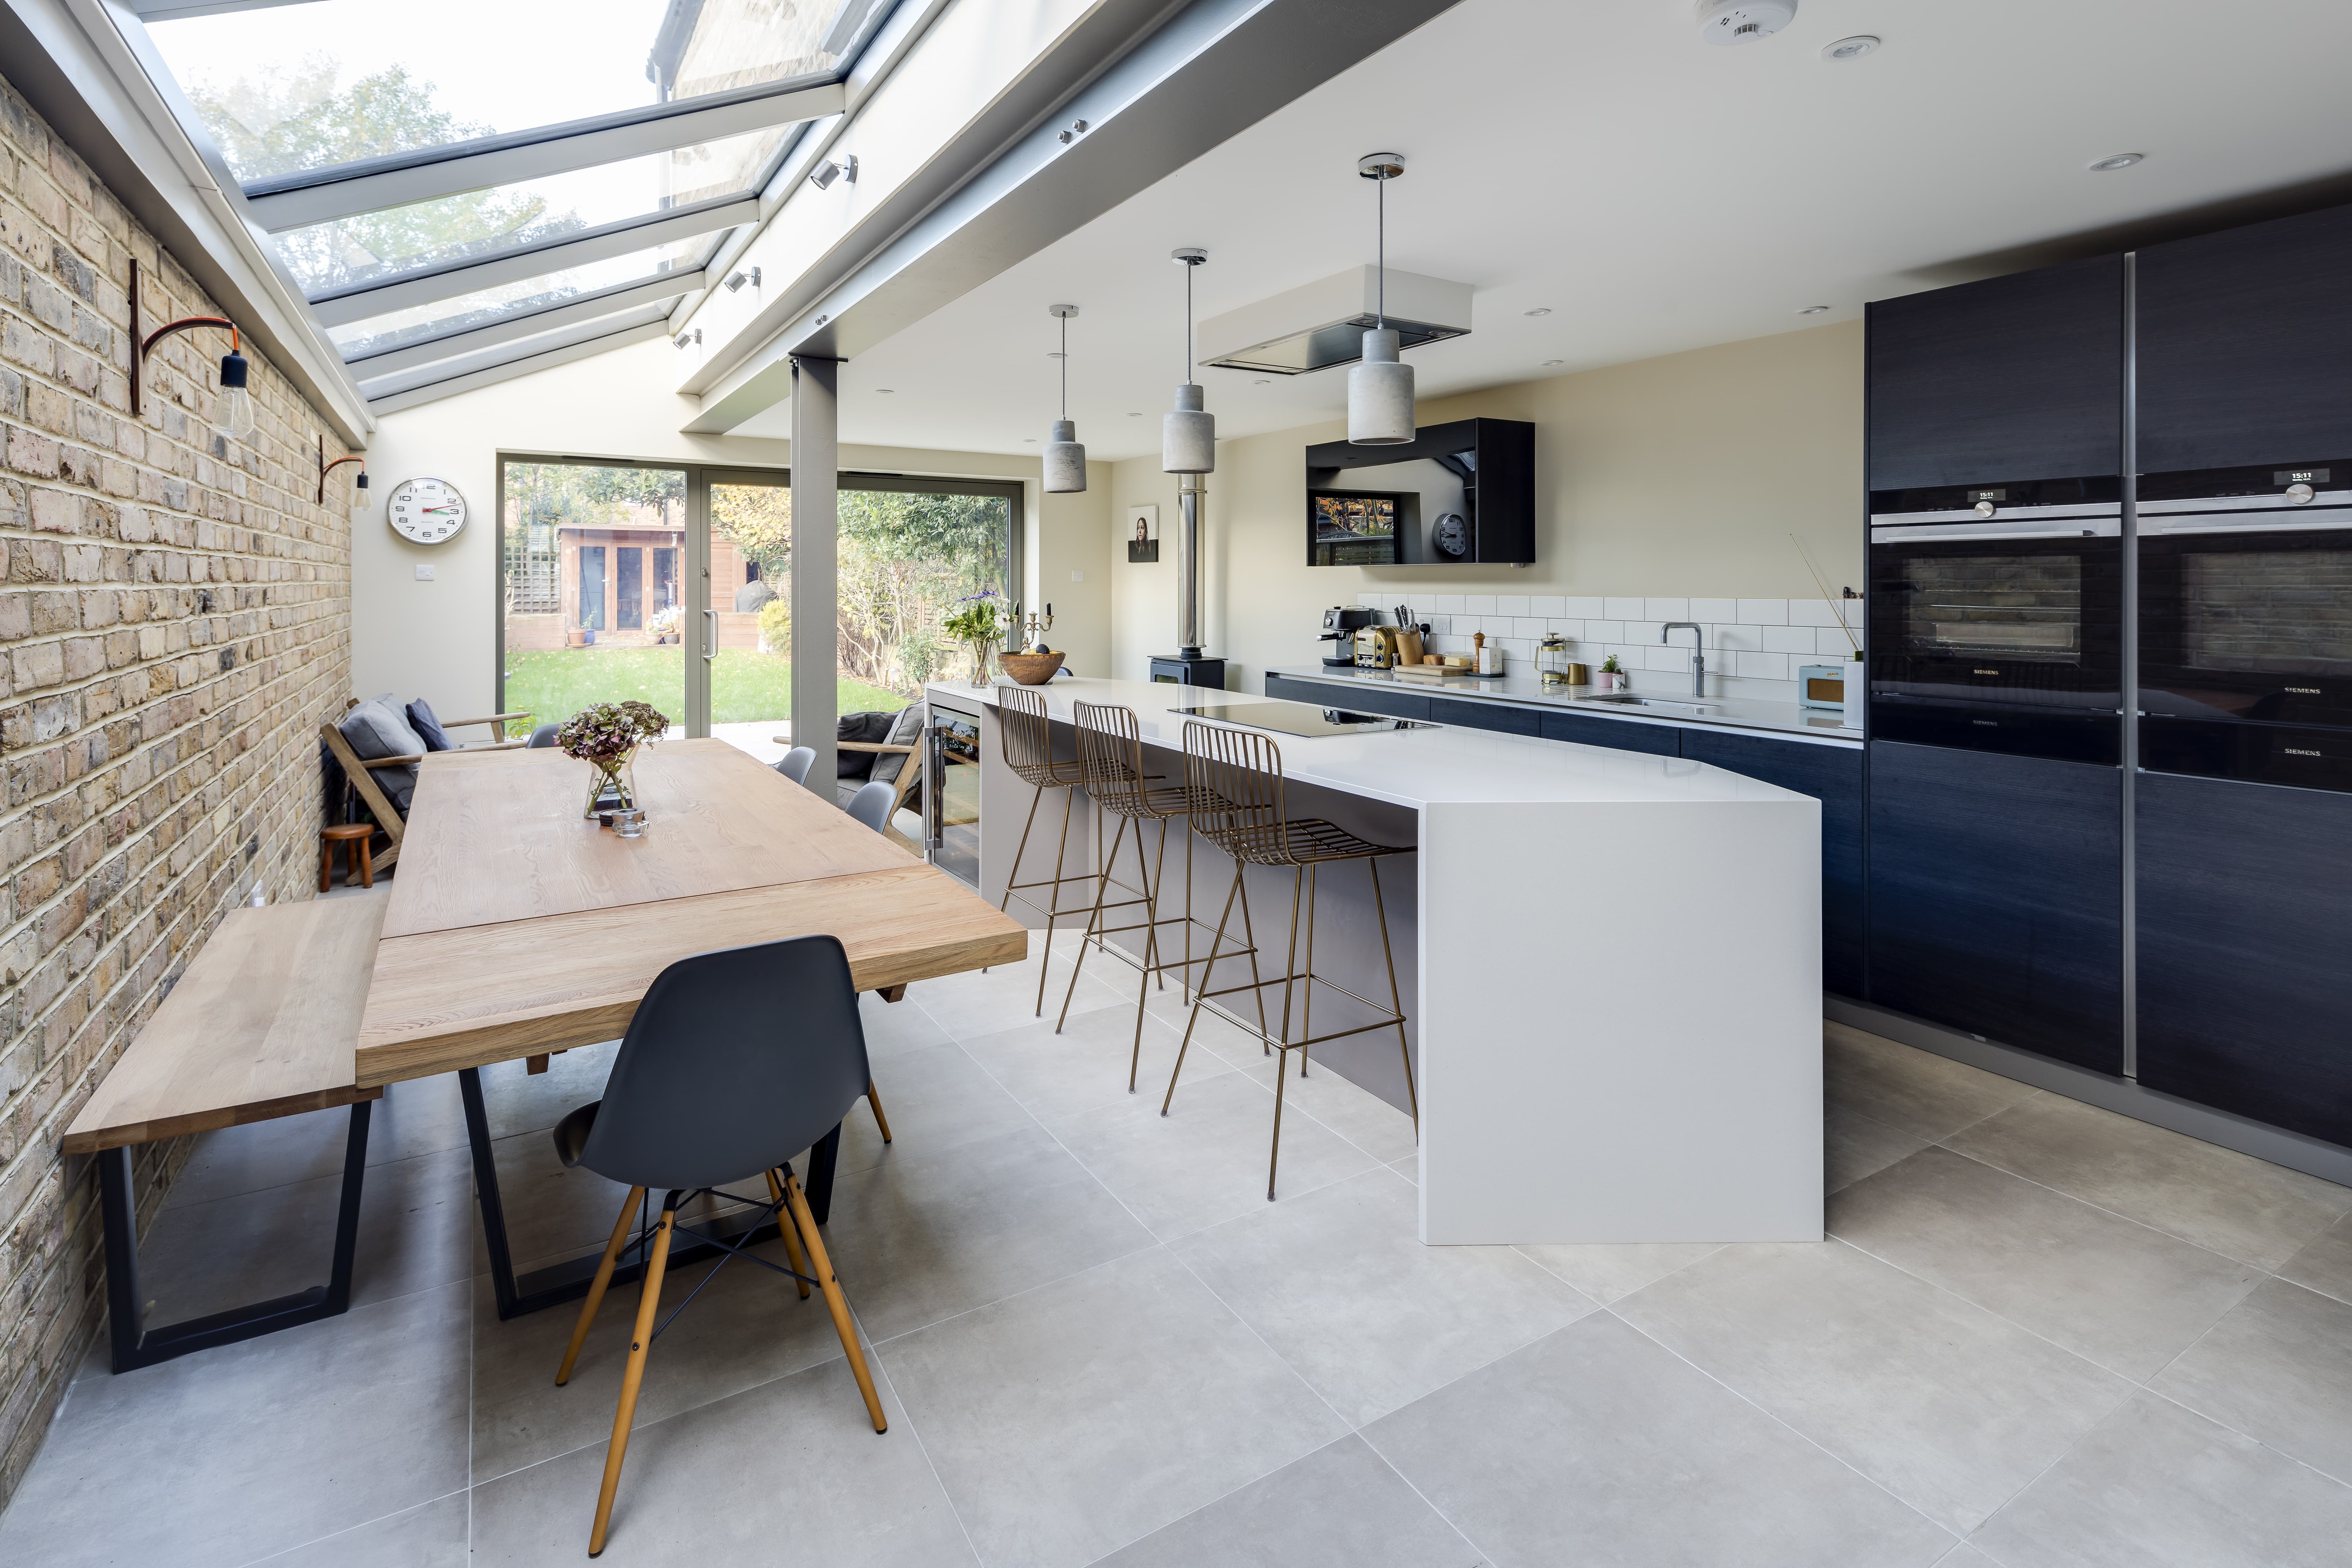 </p> <p>Find your ideal home design pro on designfor-me.com - get matched and see who's interested in your home project. Click image to see more inspiration from our design pros</p> <p>Design by Richard, architect from Lambeth, London</p> <p>#architecture #homedesign #modernhomes #homeinspiration #kitchens #kitchendesign #kitcheninspiration #kitchenideas #kitchengoals #slidingdoors </p> <p>